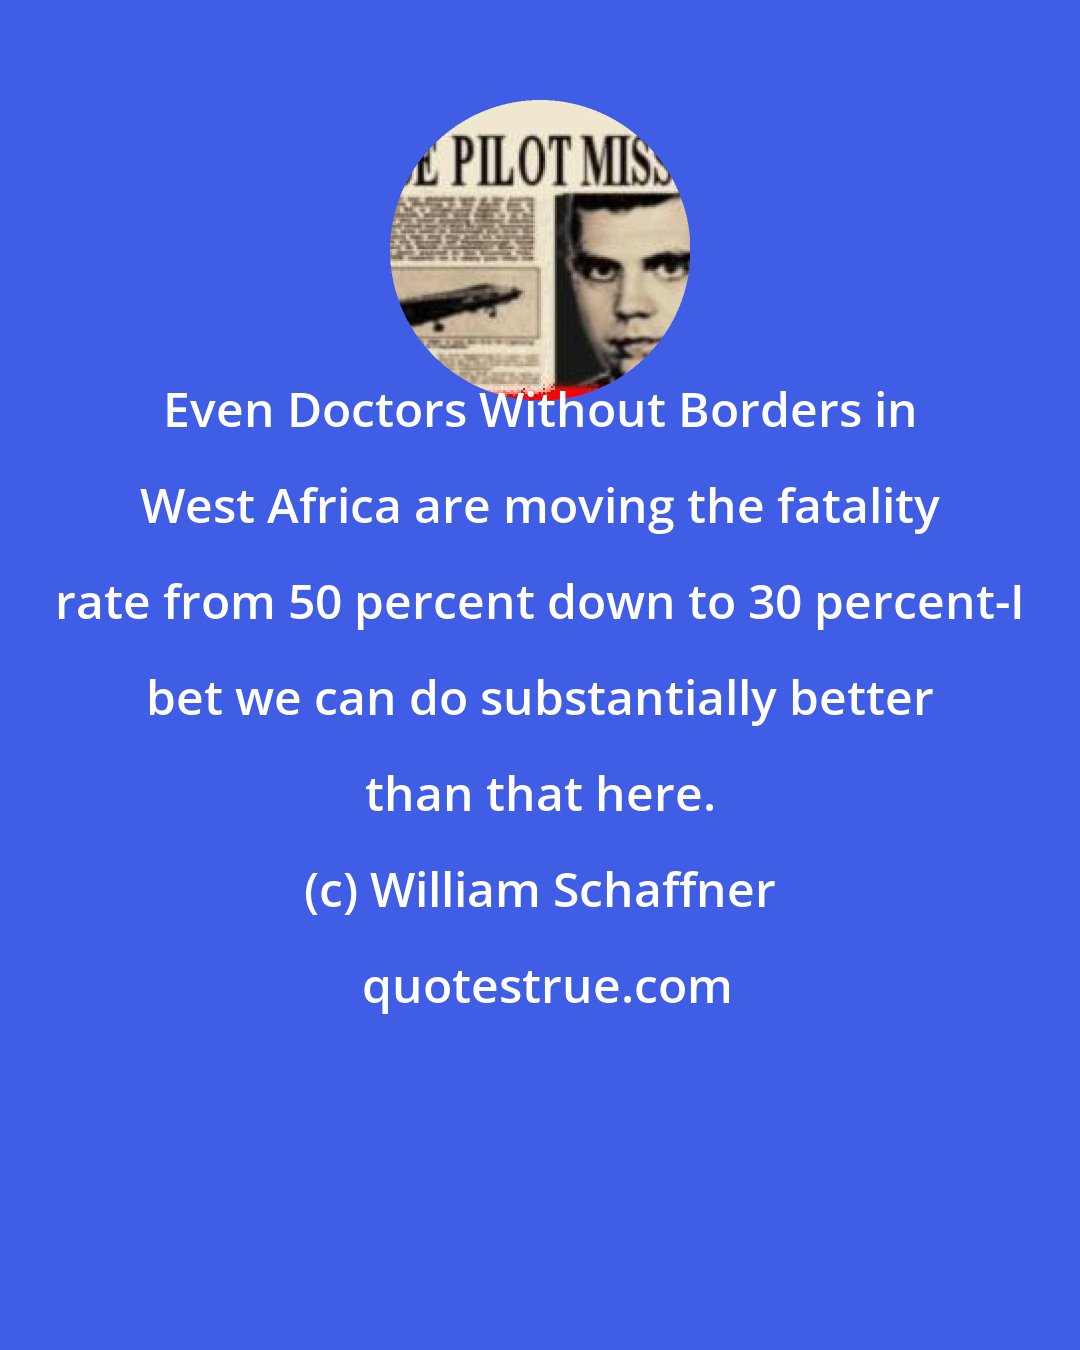 William Schaffner: Even Doctors Without Borders in West Africa are moving the fatality rate from 50 percent down to 30 percent-I bet we can do substantially better than that here.